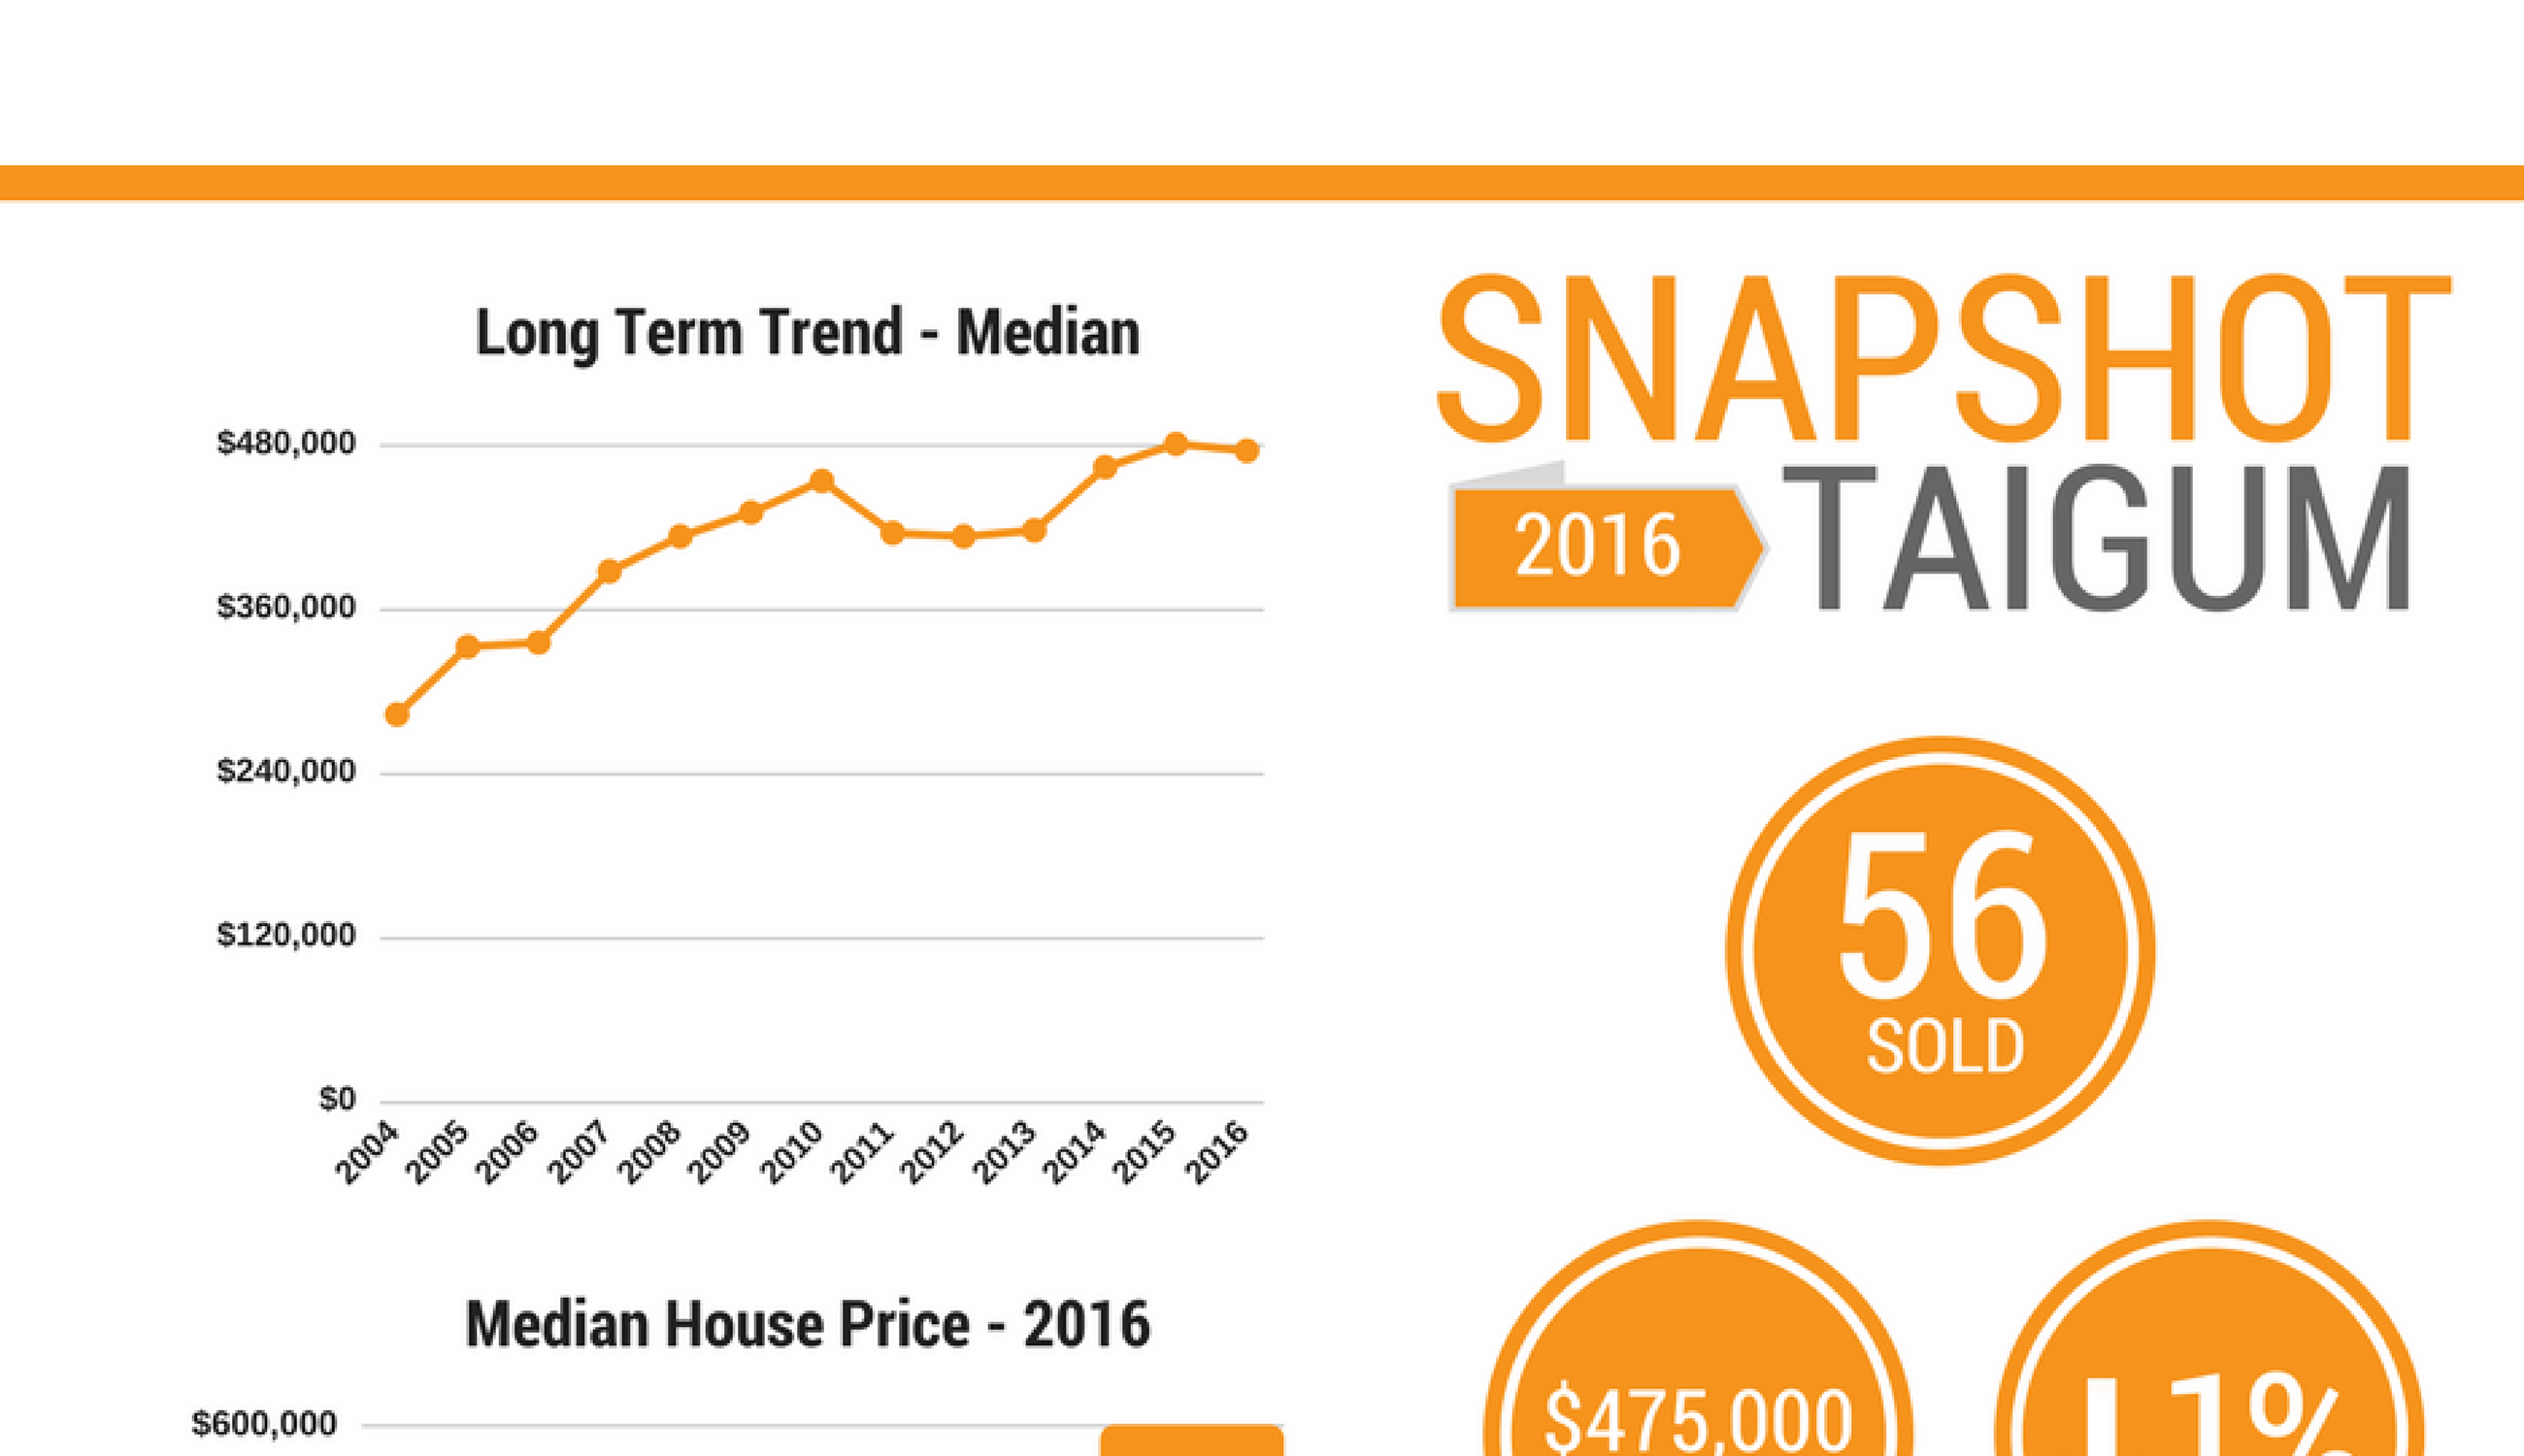 #SNAPSHOT - Are we seeing the peak in property values in Taigum?